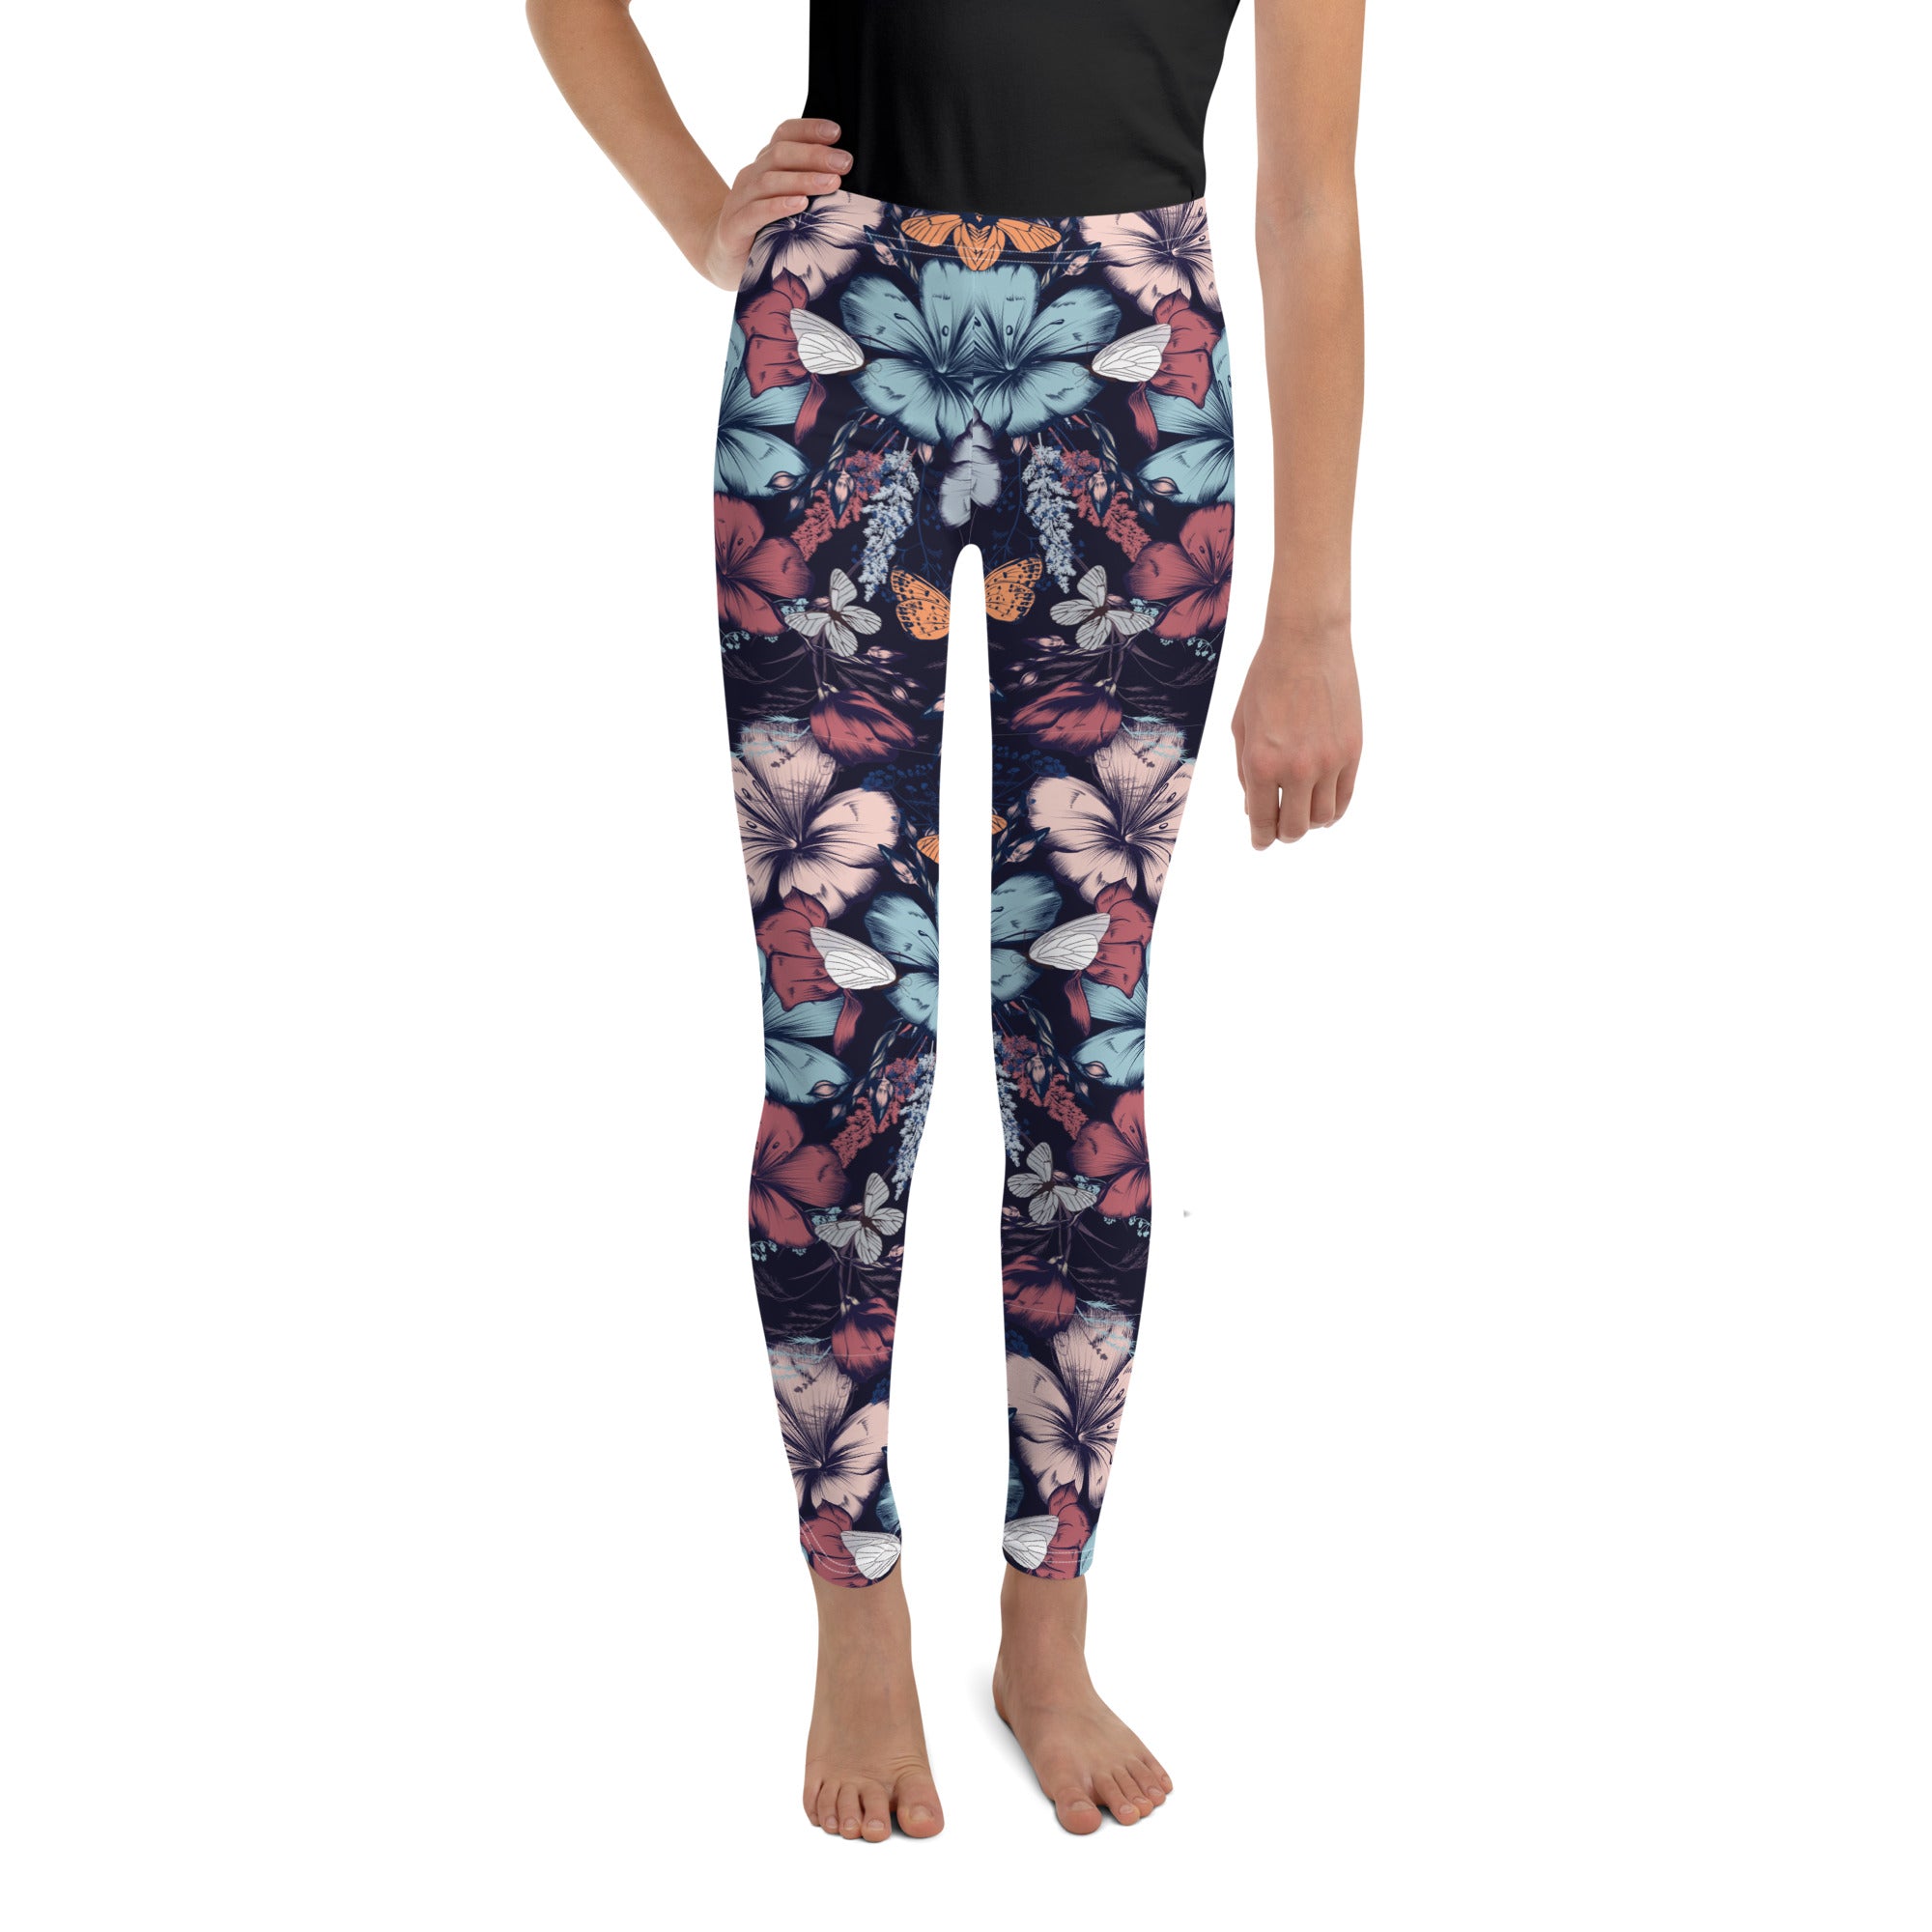 Youth Leggings- BUTTERFLY GARDEN VINTAGE STYLE